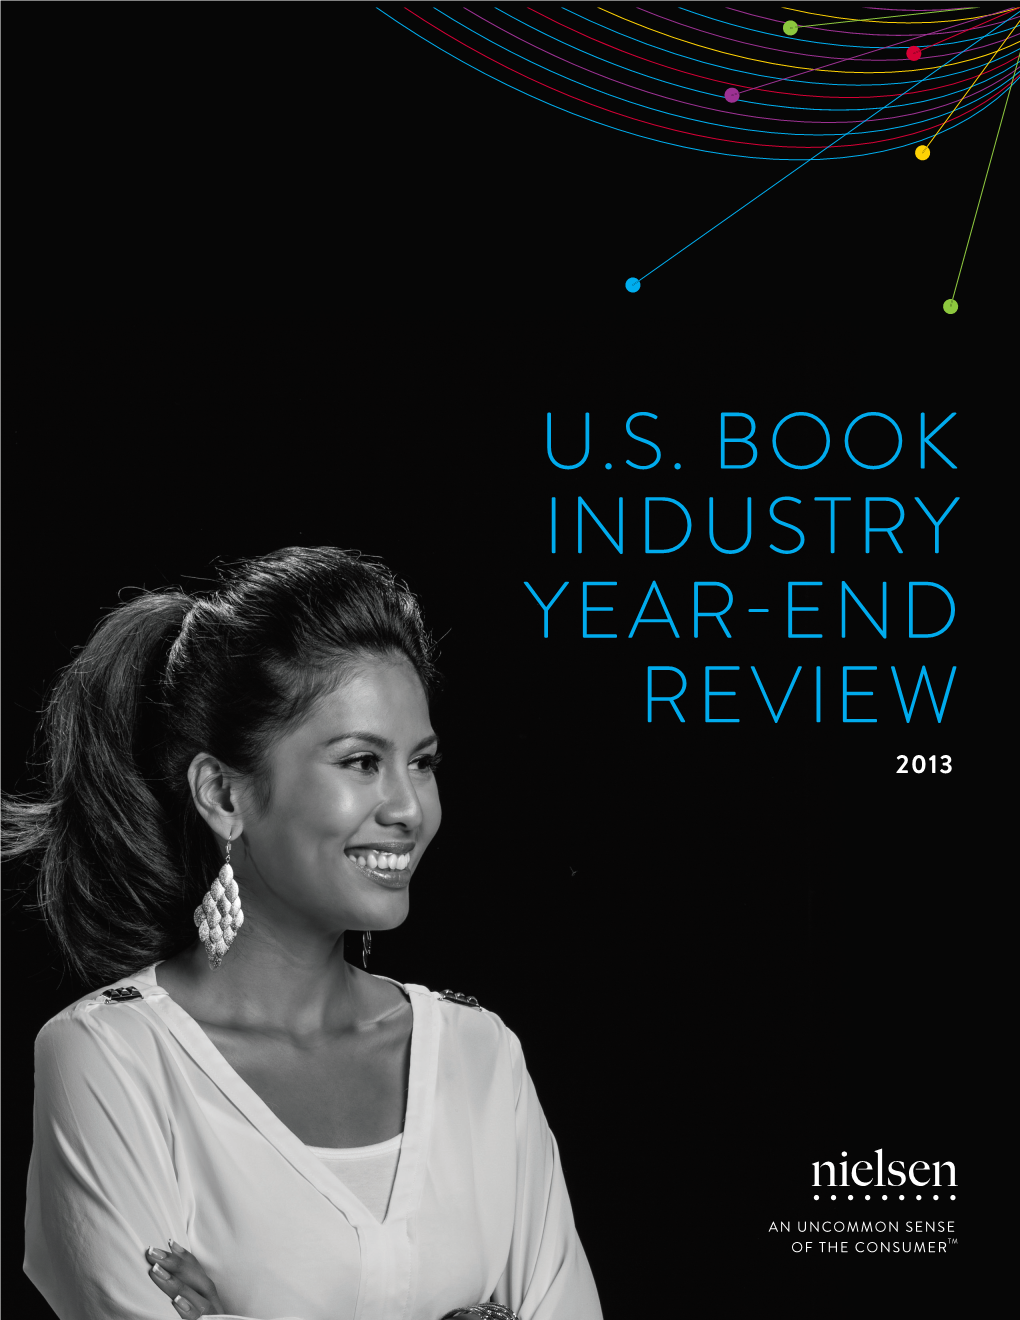 U.S. Book Industry Year-End Review 2013